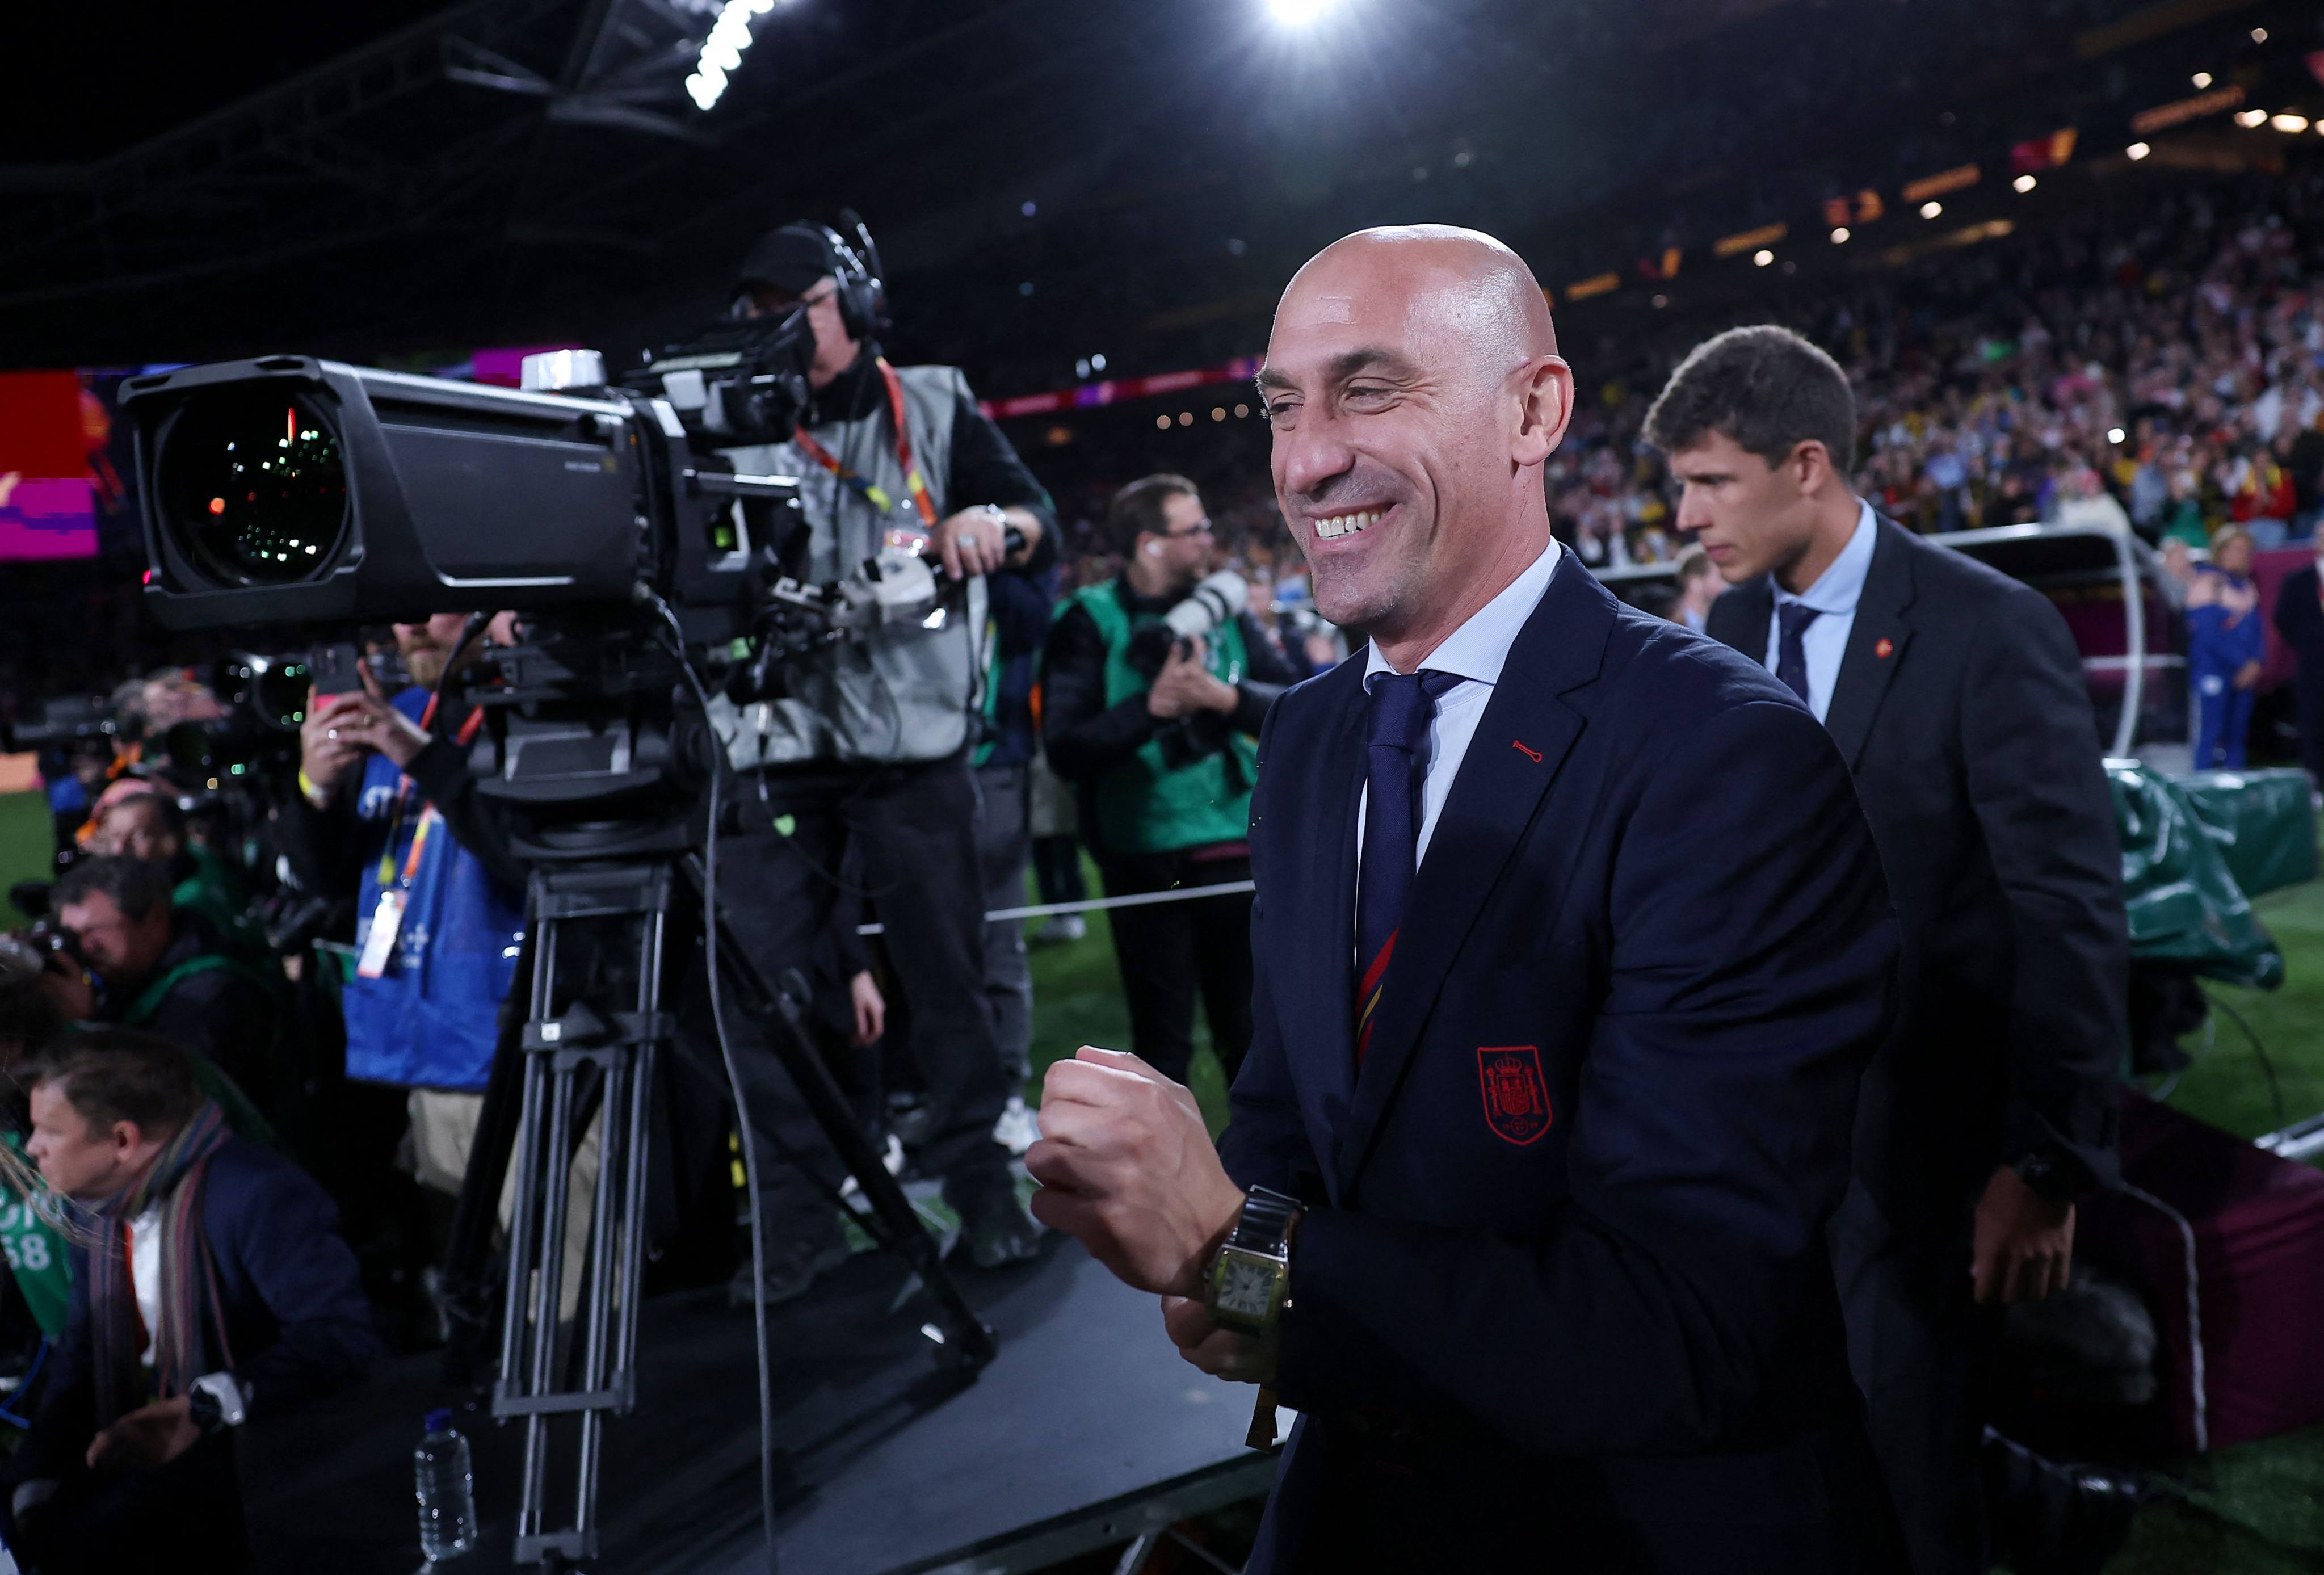 Spanish football federation president Luis Rubiales was criticised for his conduct at last weekend’s Women’s World Cup final. Photo: AFP